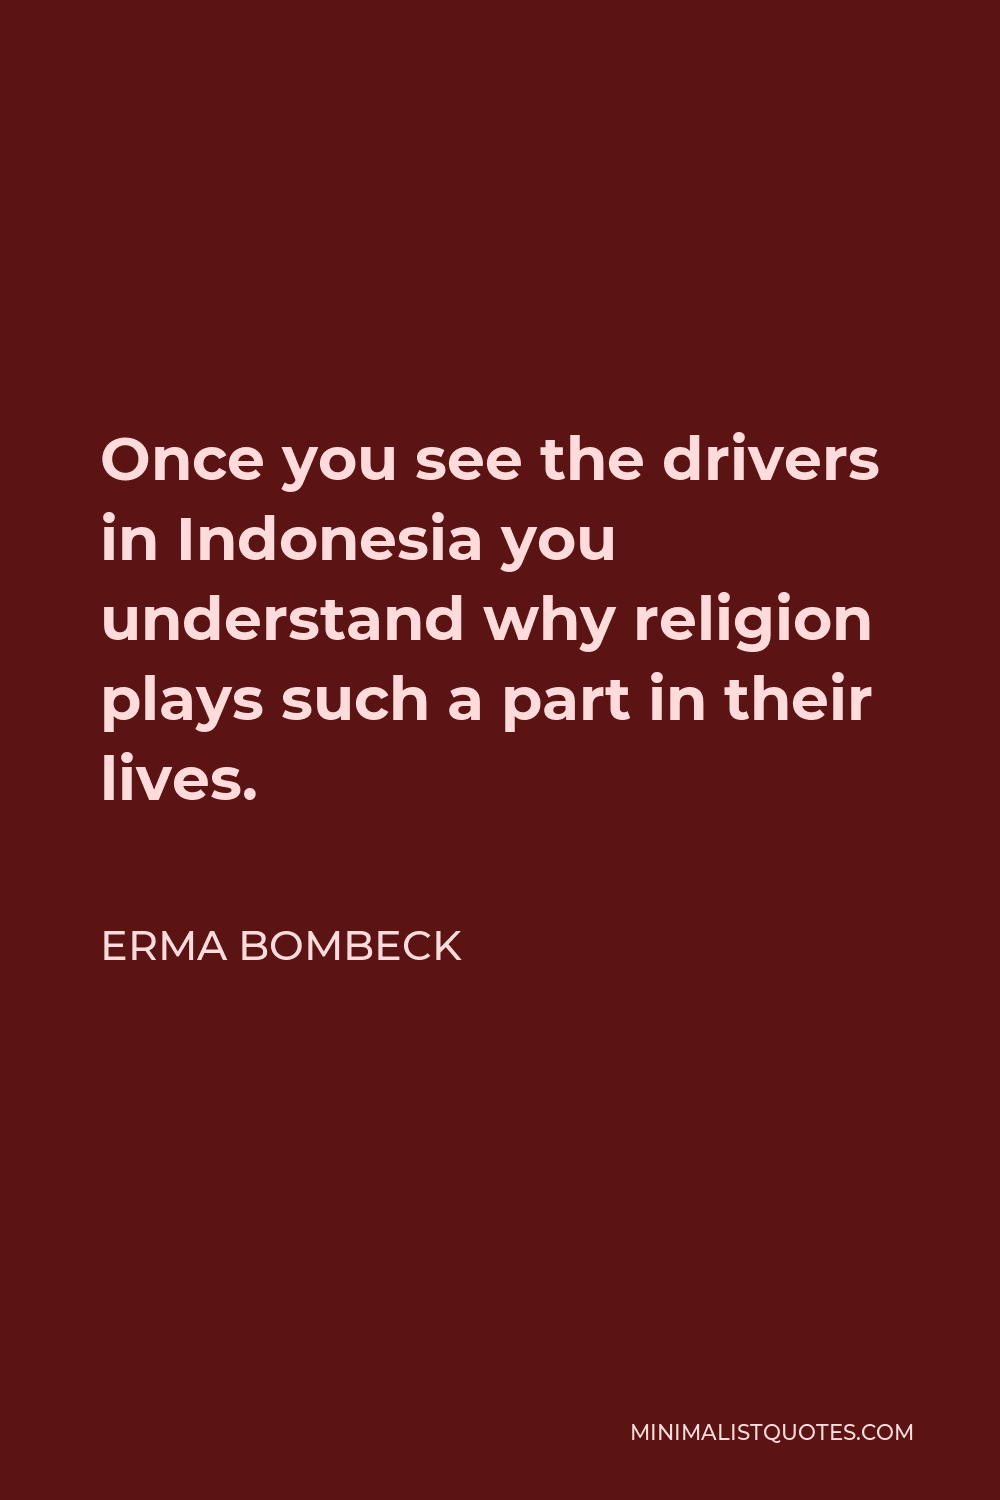 Erma Bombeck Quote - Once you see the drivers in Indonesia you understand why religion plays such a part in their lives.